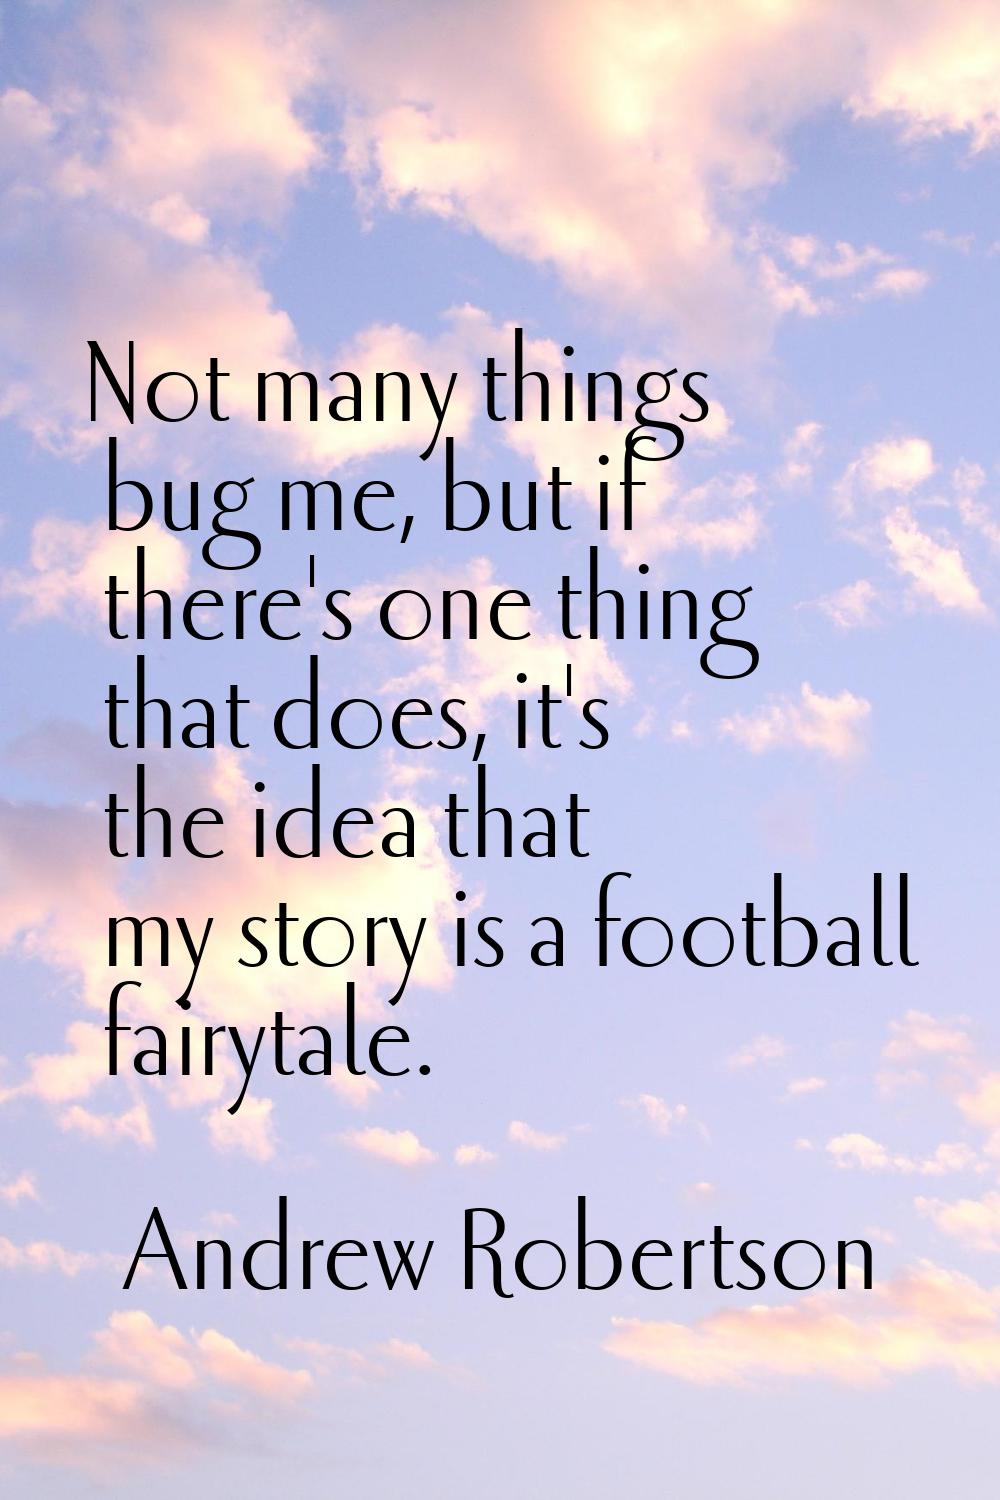 Not many things bug me, but if there's one thing that does, it's the idea that my story is a footba